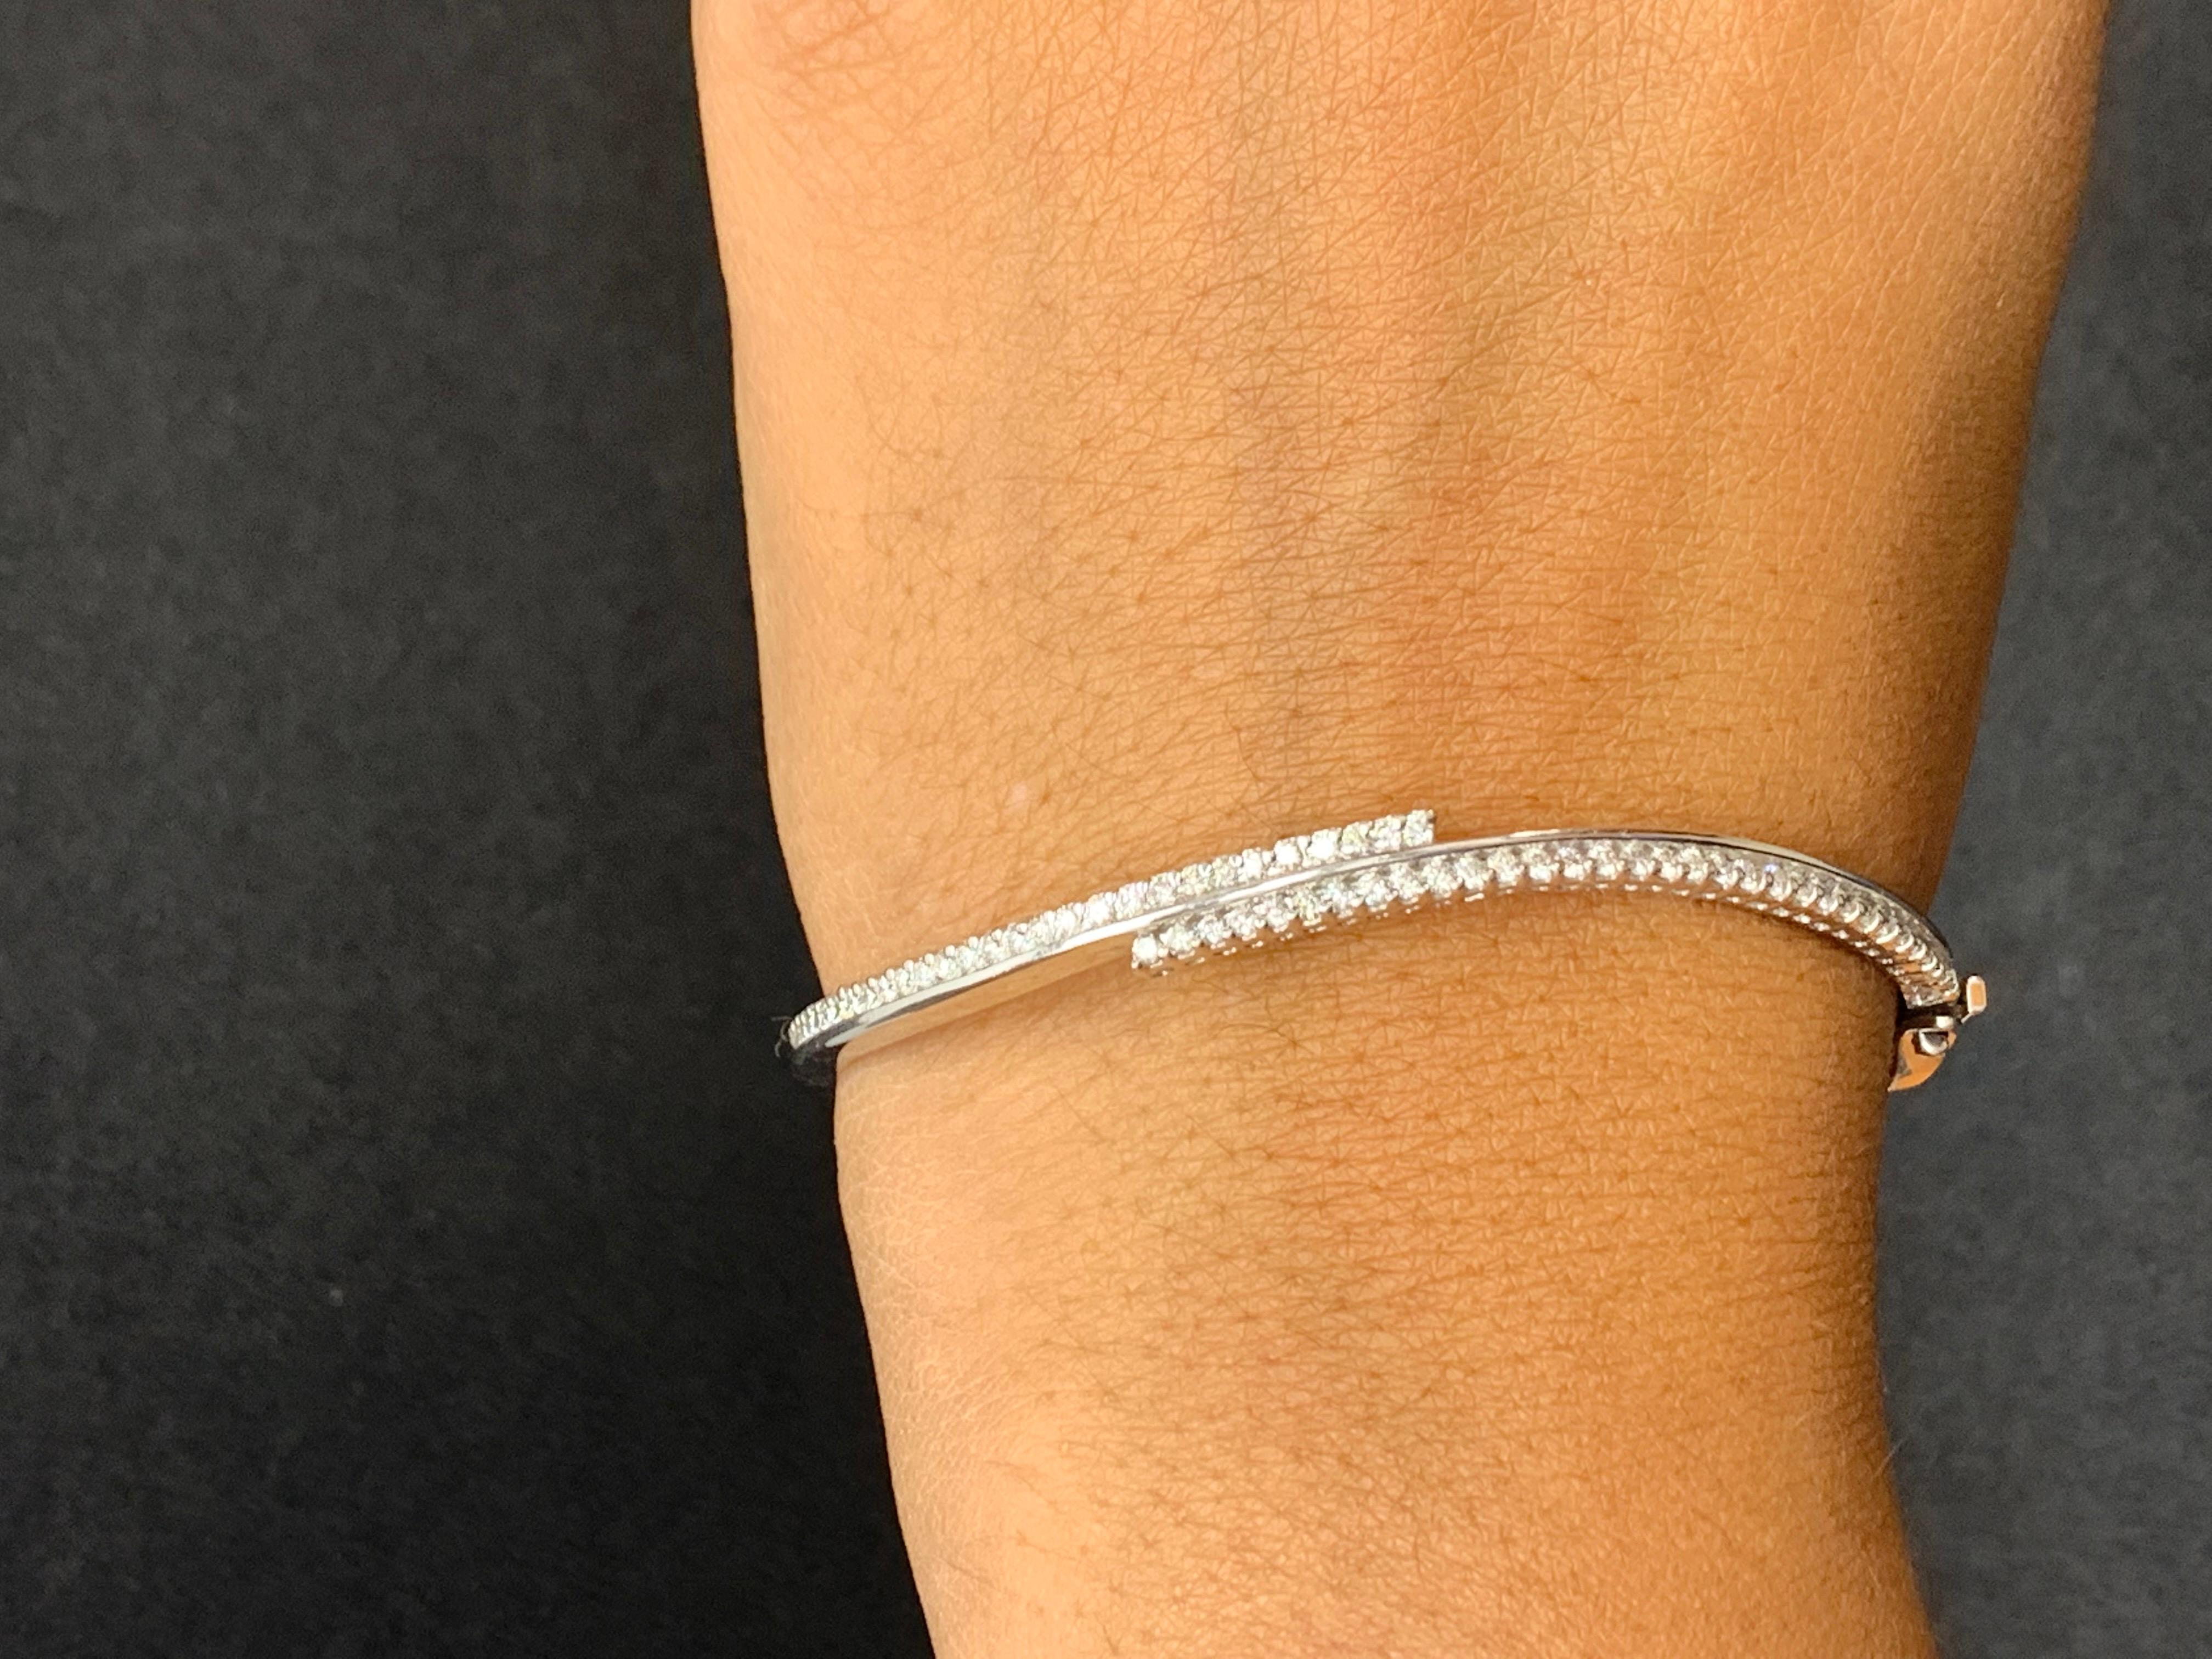 This beautiful Diamond bangle features 64 brilliant-cut round diamonds weighing around 1.00 carats total.  The bracelet has a curved design. Made in 14k white gold. Perfect for a cocktail party.